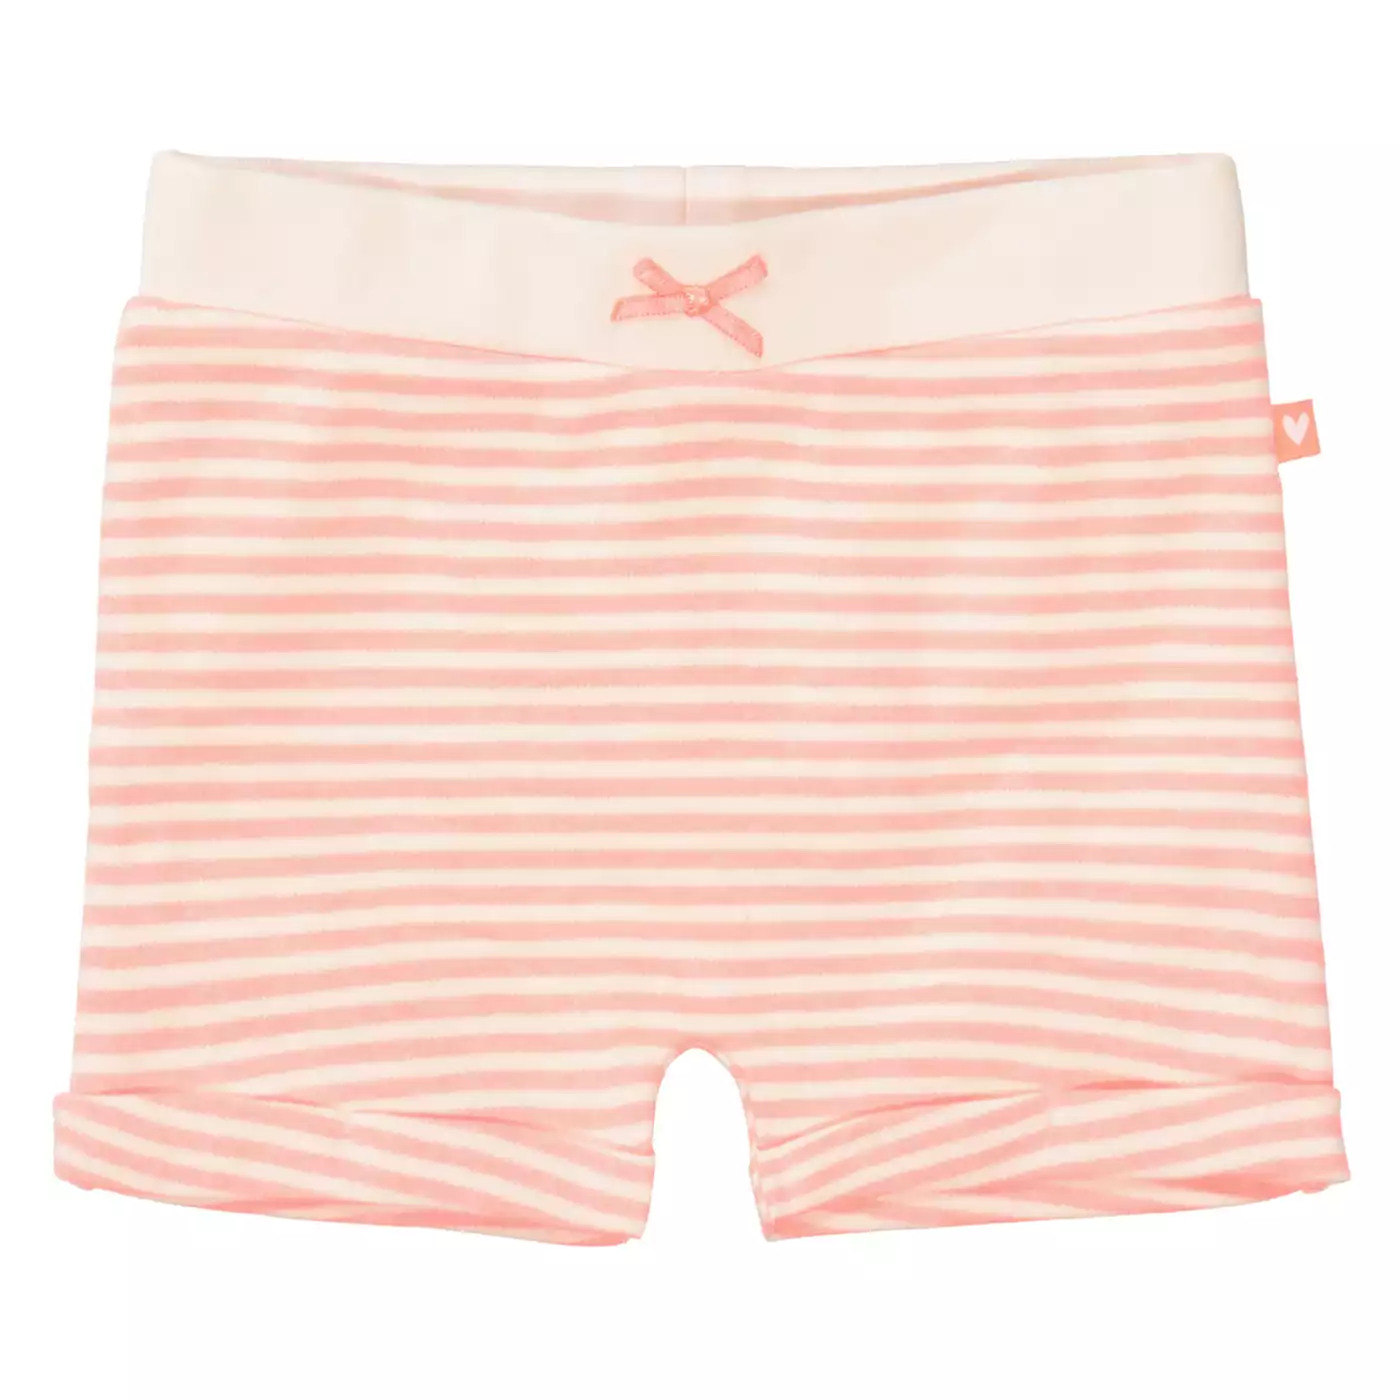 Shorts Neon Coral STACCATO Pink Rosa M2004580296103 1